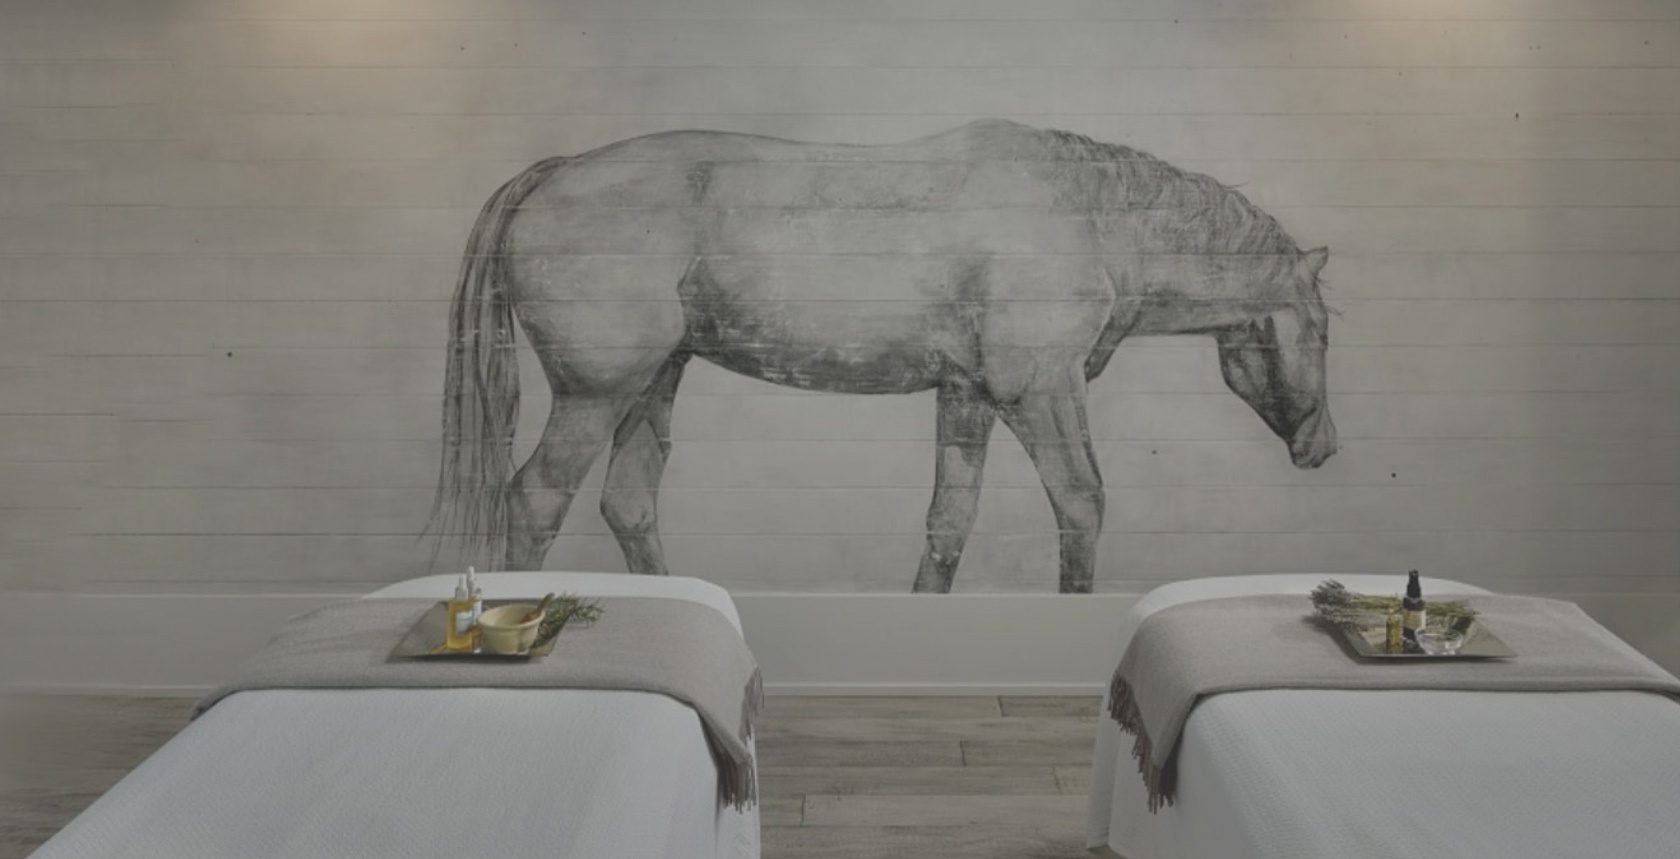 Interior view at the Farmhouse Inn Spa: two massage tables with massage ointments neatly placed and background wall painting of a horse.